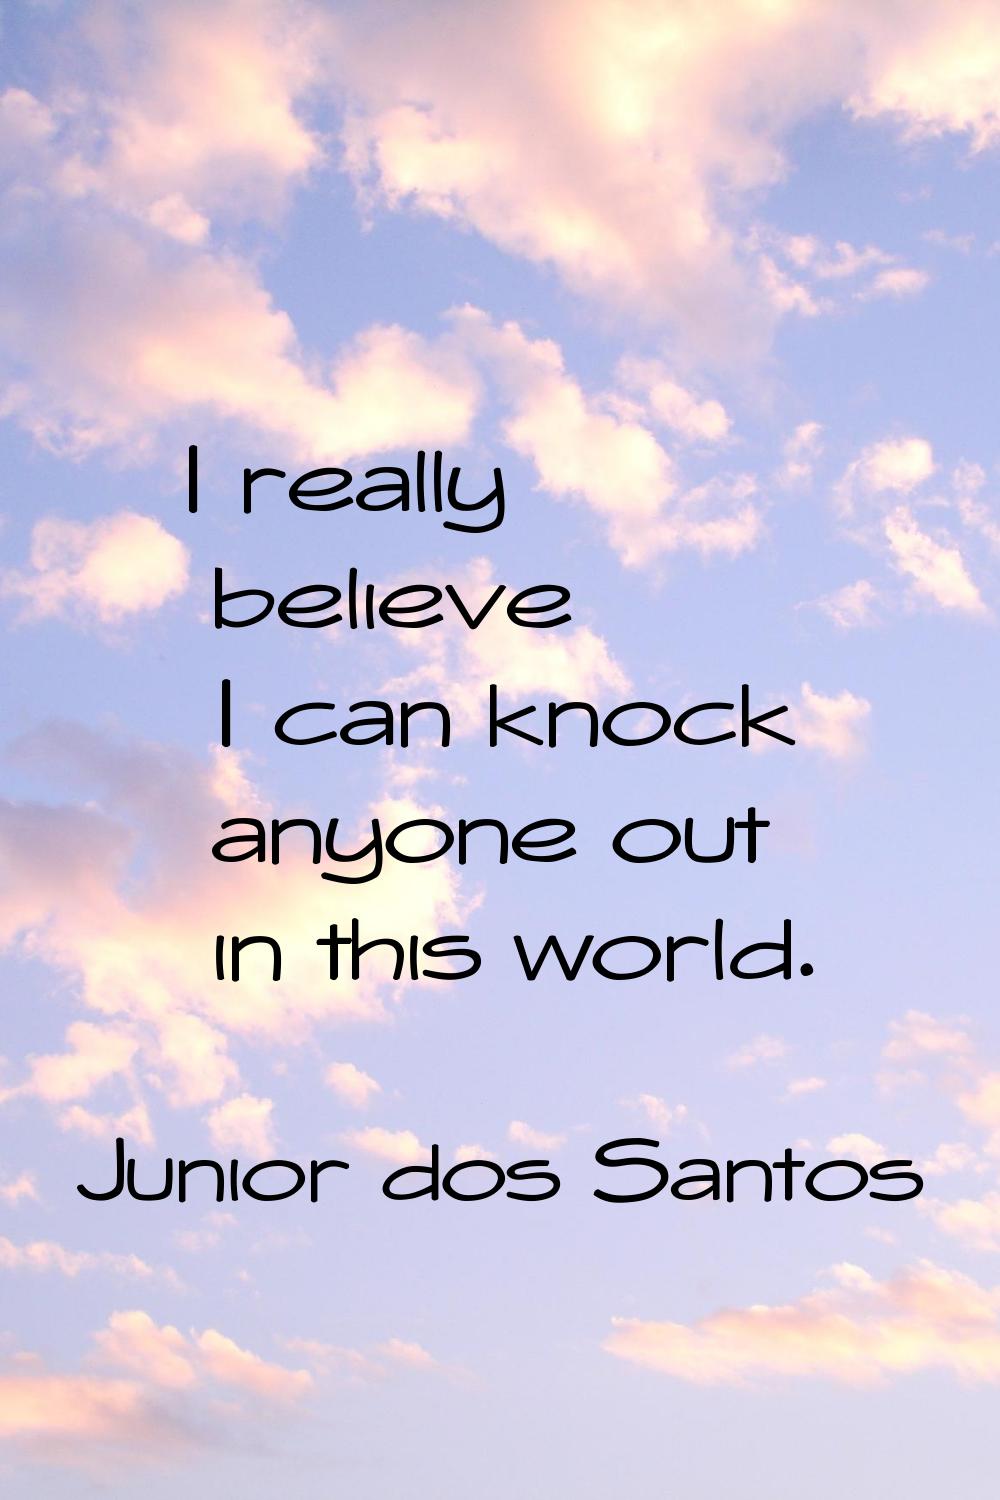 I really believe I can knock anyone out in this world.